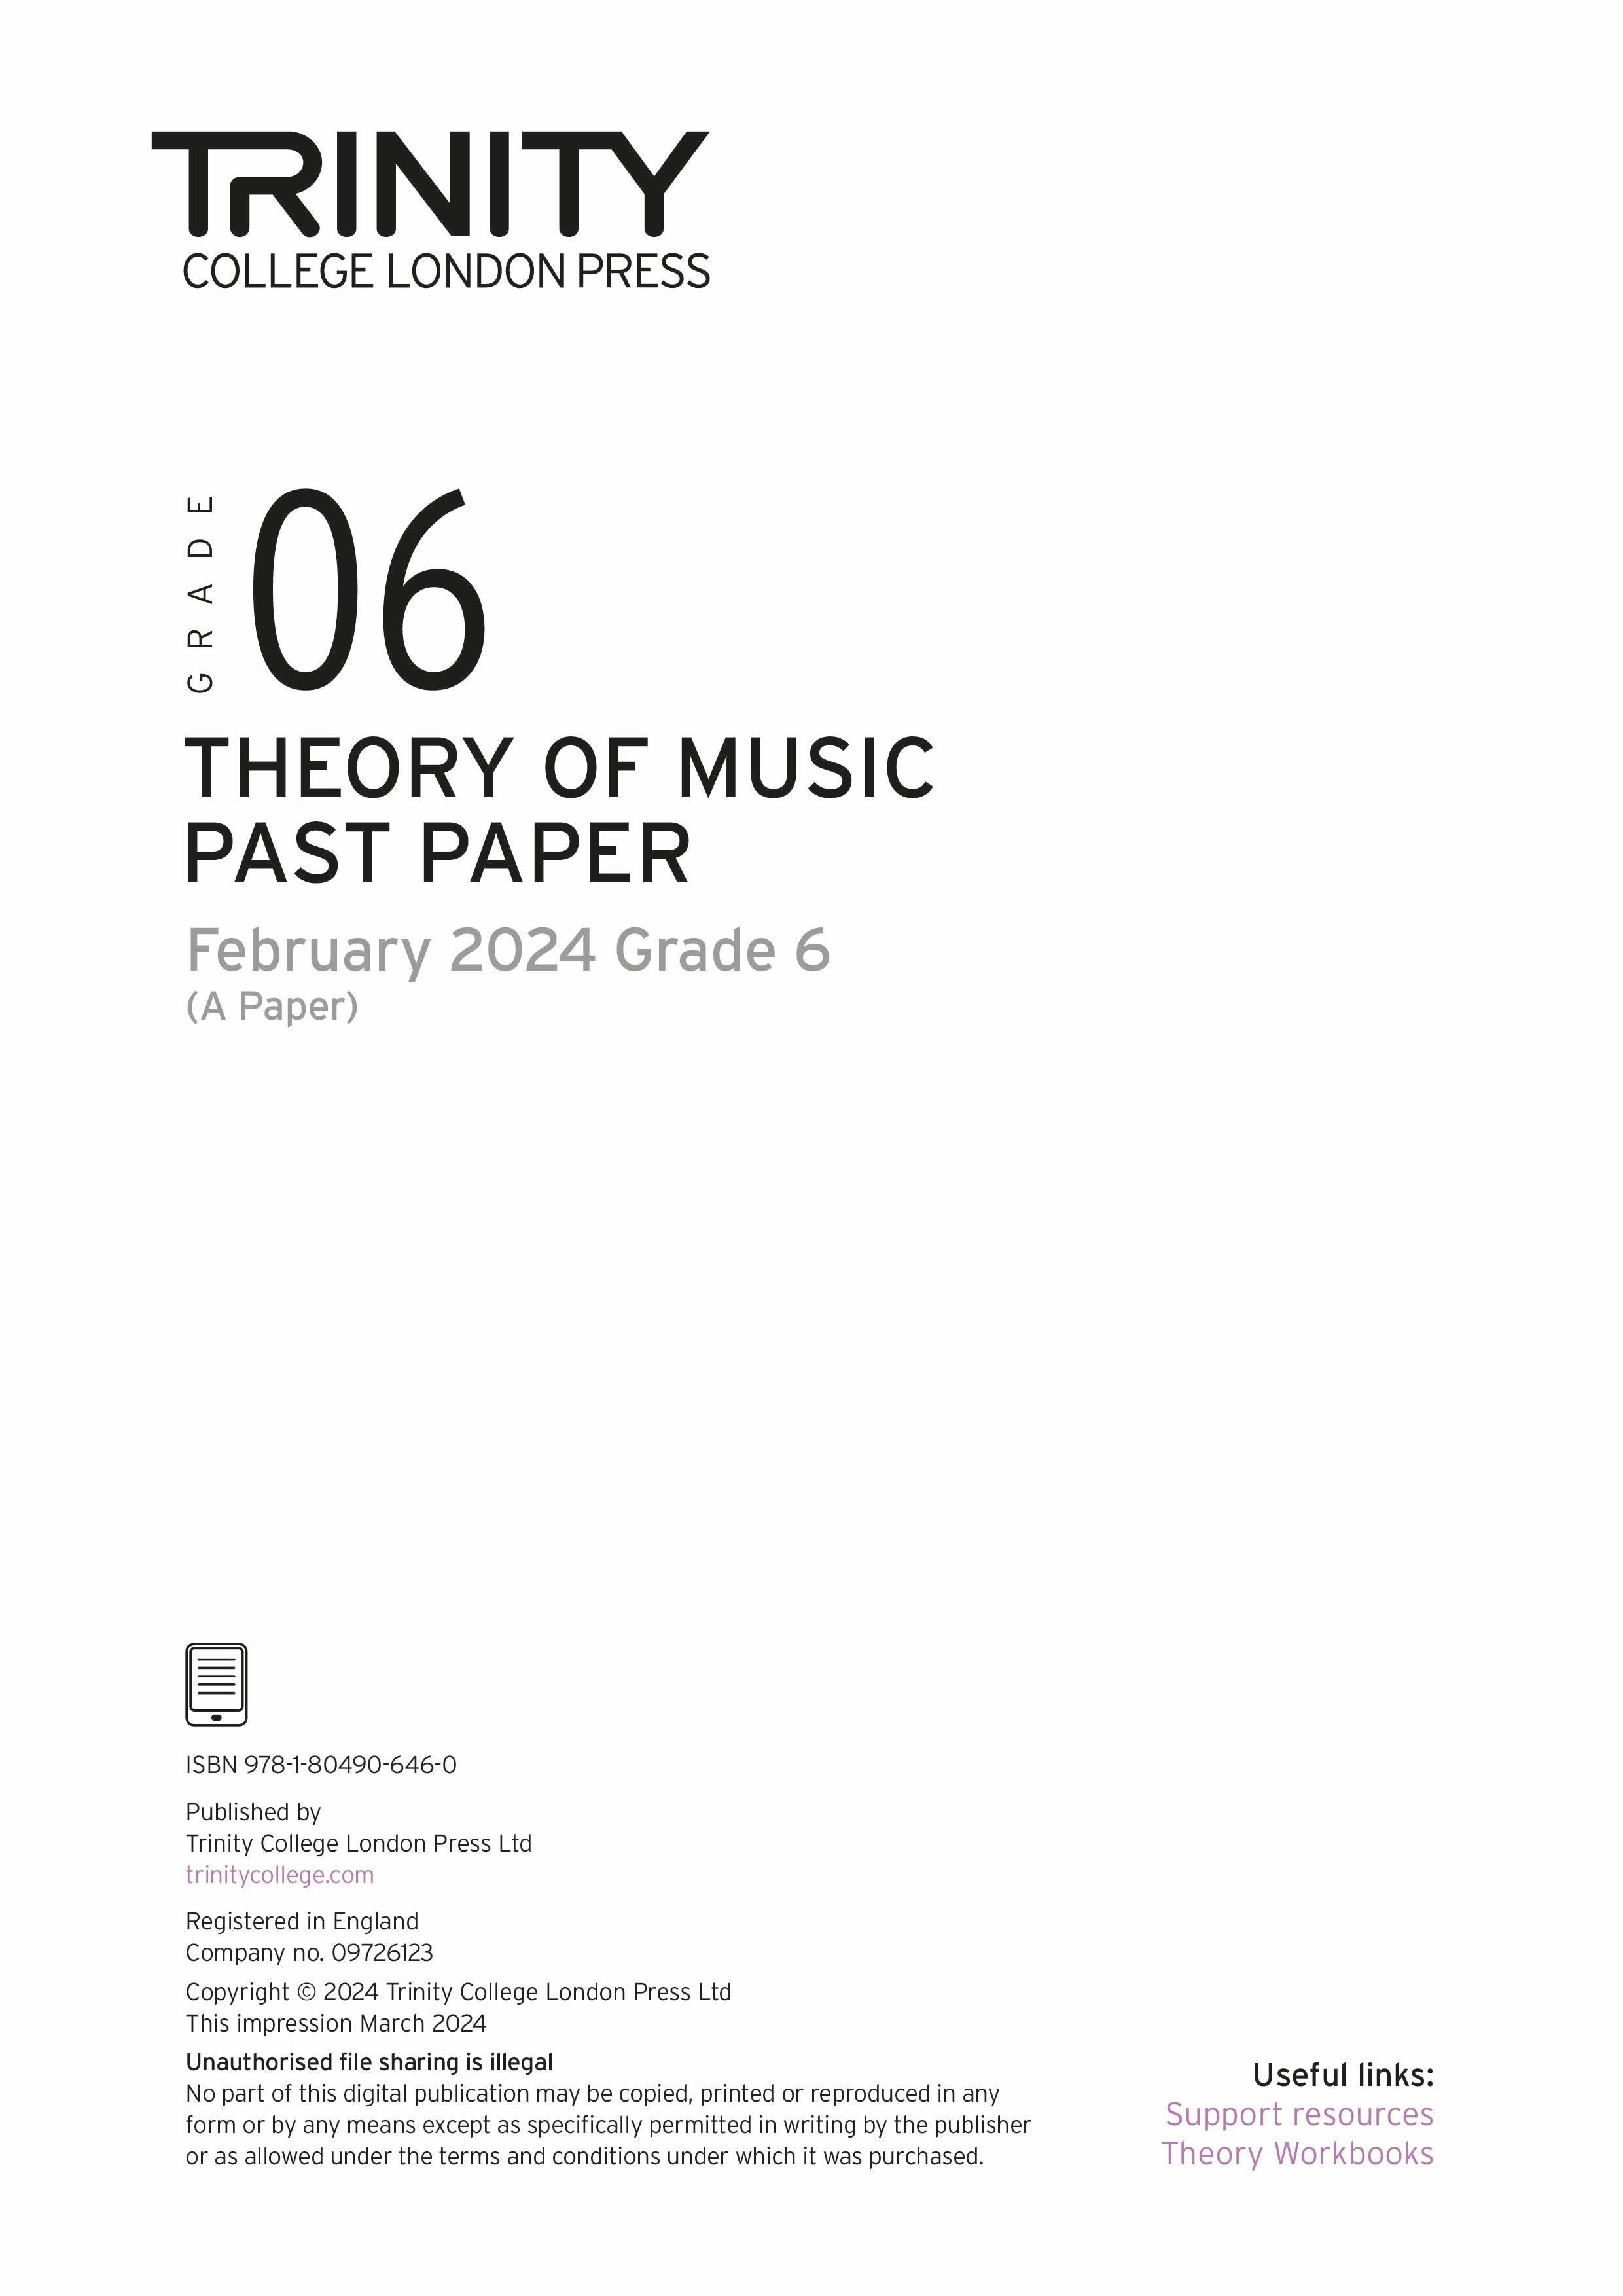 Theory of Music Past Paper 2024 February A: Grade 6 - ebook